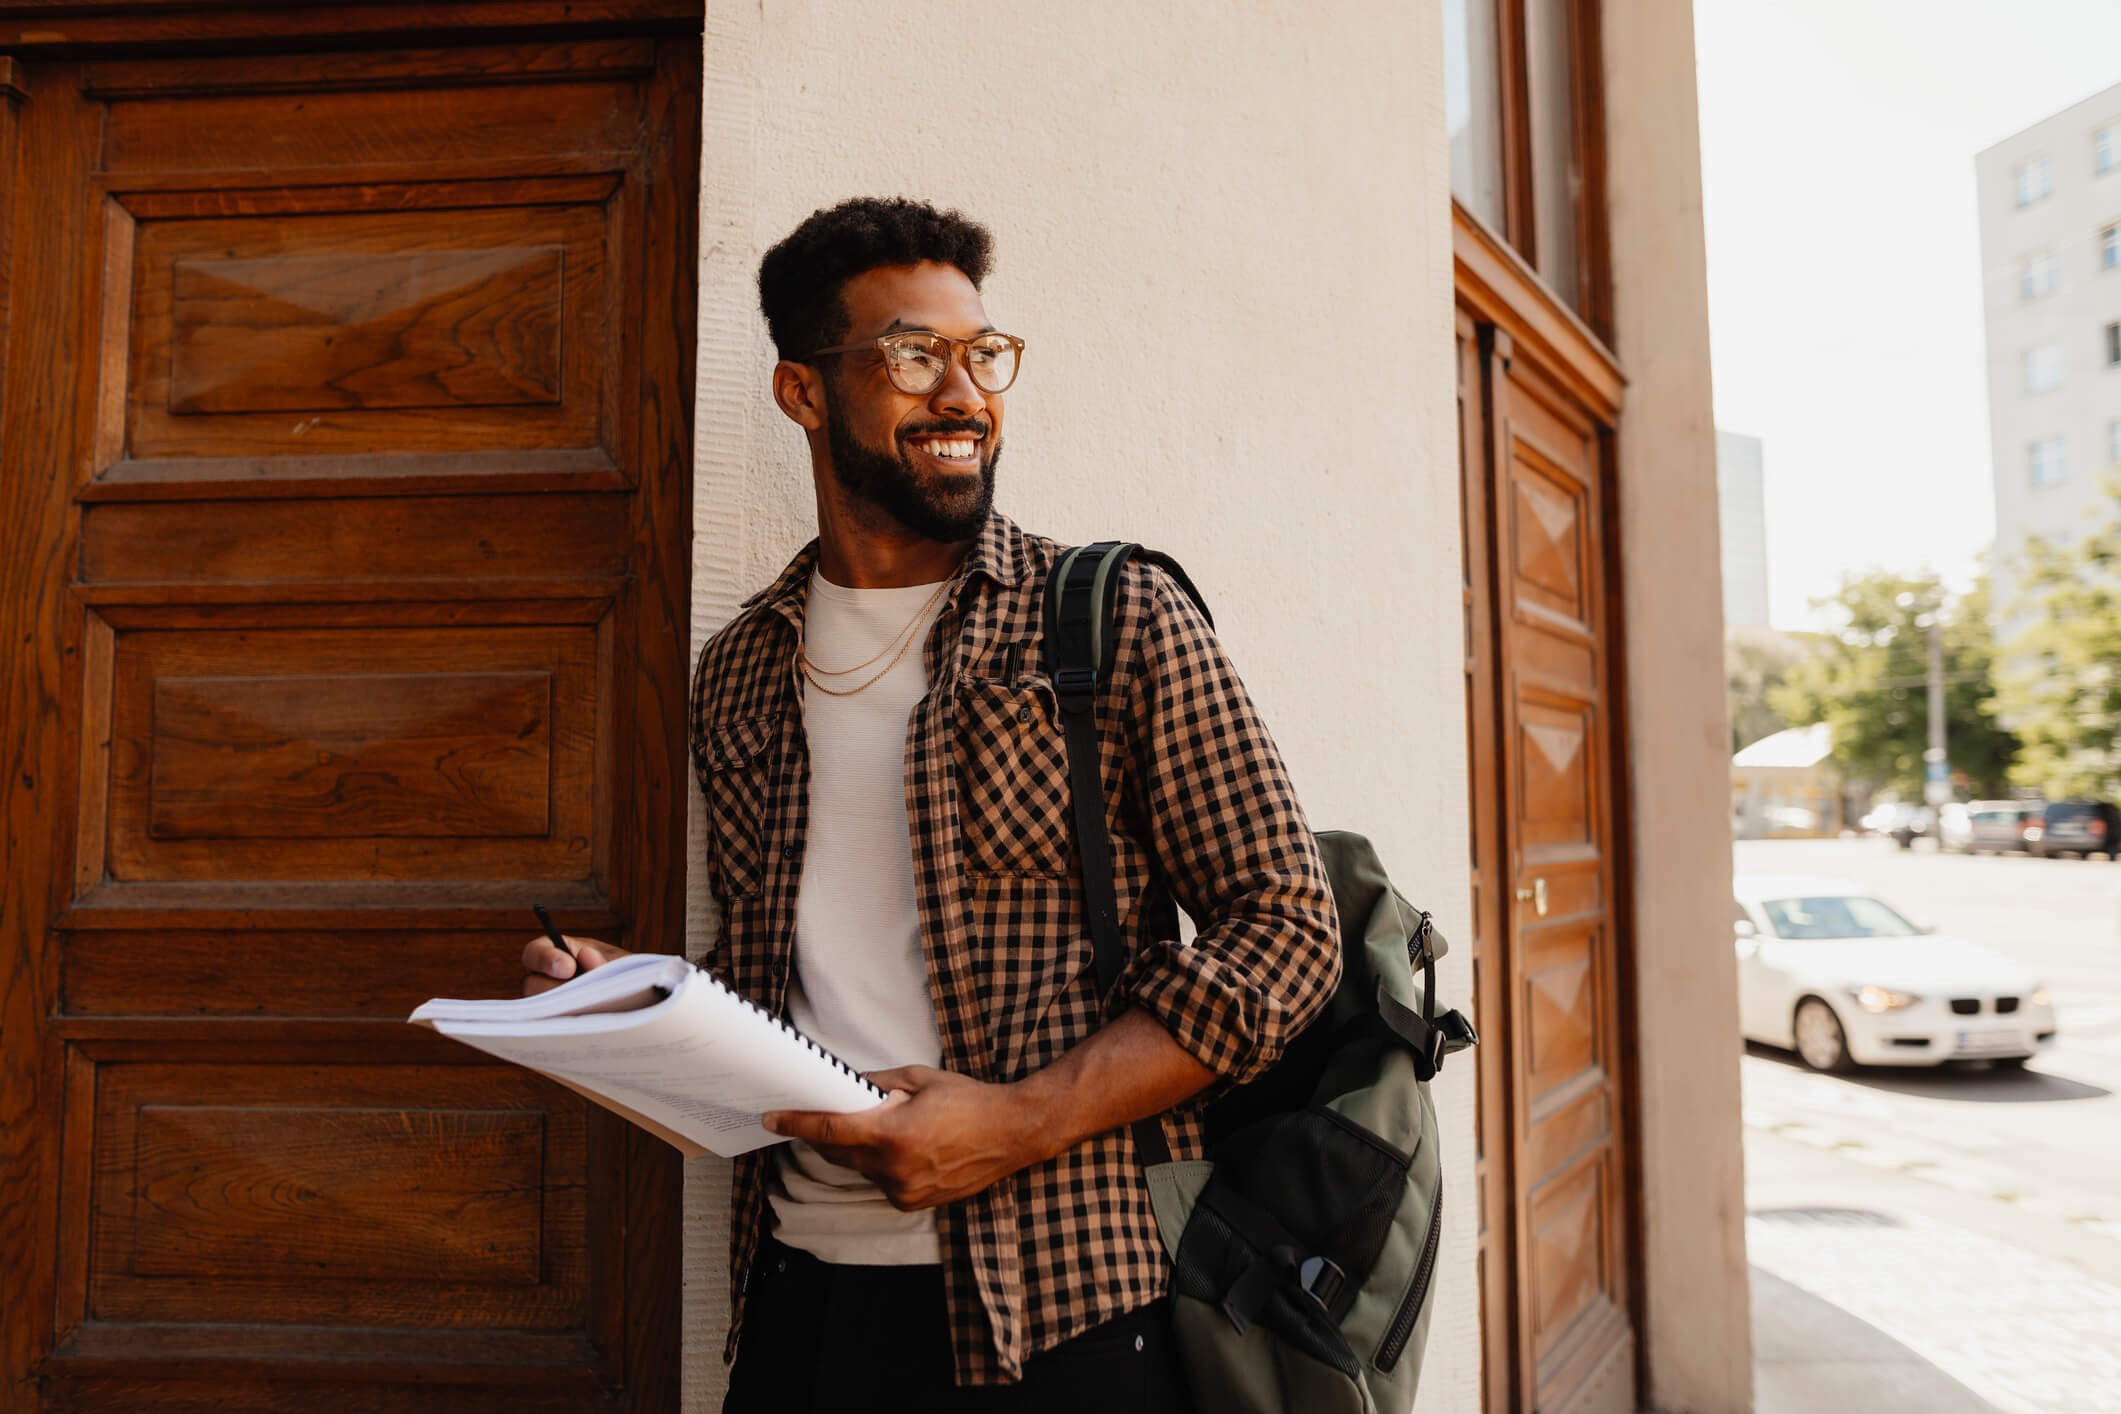 A man in a white shirt and checkered long-sleeve shirt wearing glasses is standing outside a doorway; he is smiling while holding a notebook and looking past him.